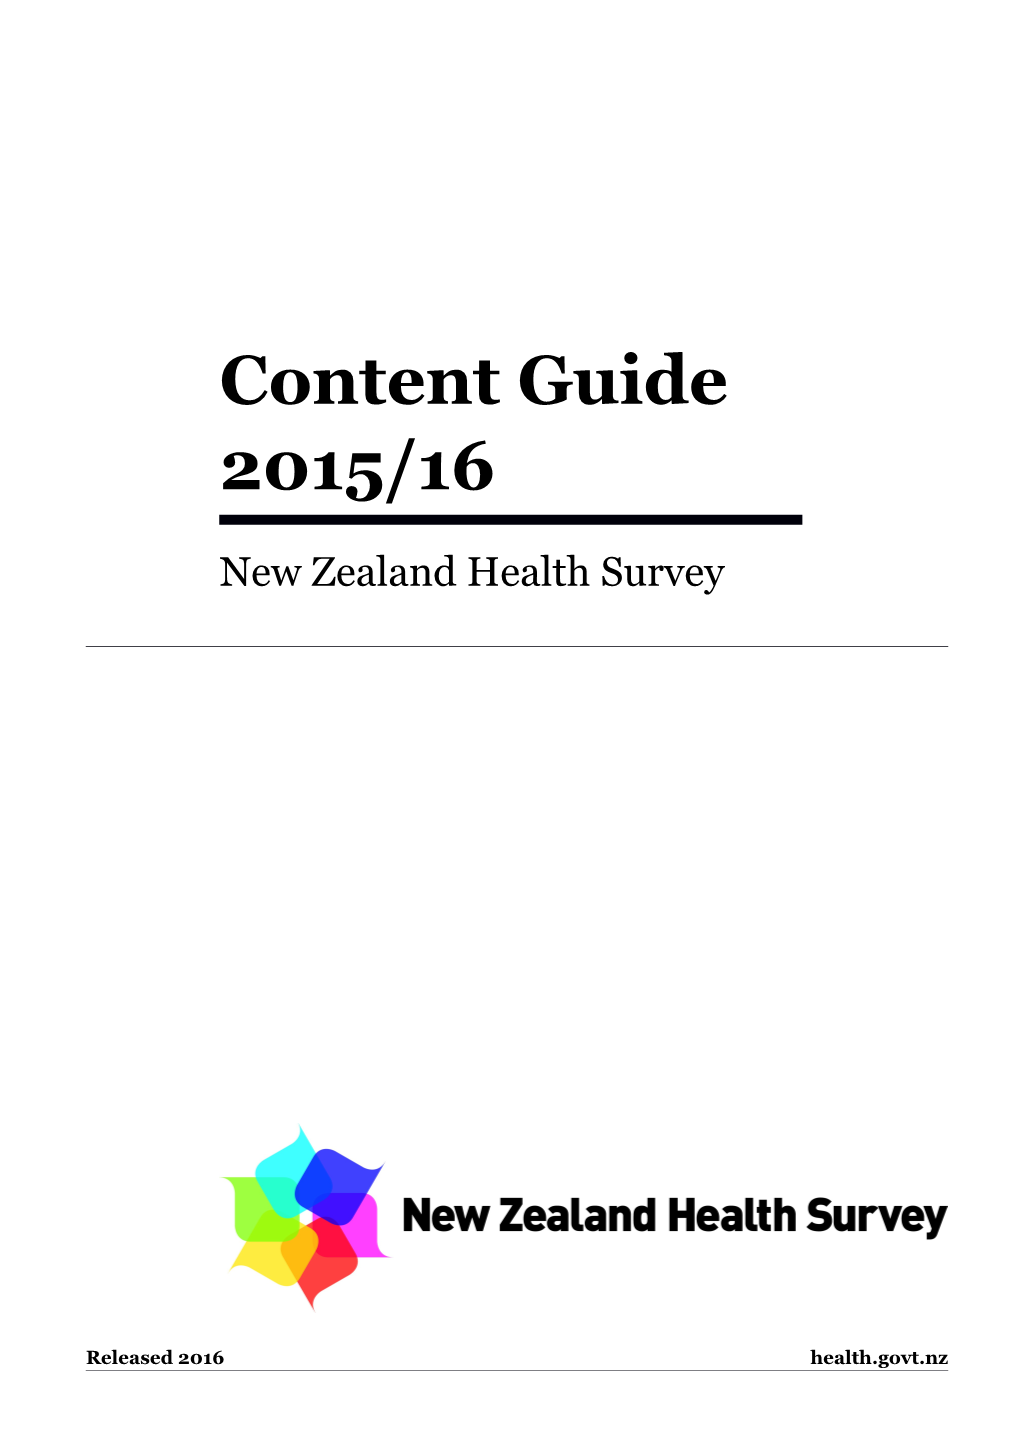 Content Guide 2015/16 New Zealand Health Survey